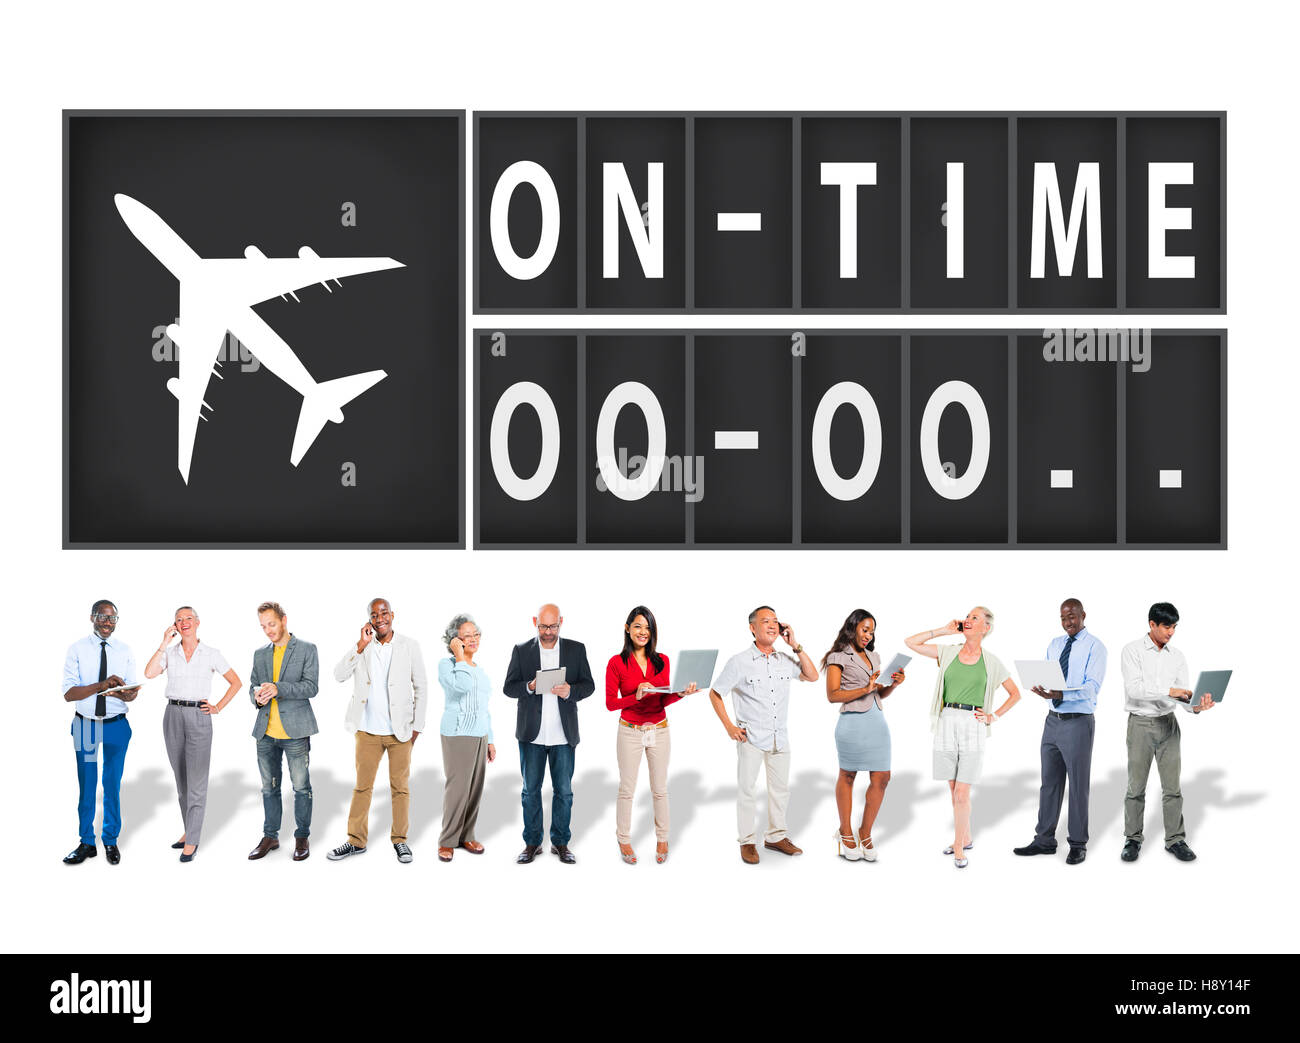 On Time Punctual Efficiency Organization Management Concept Stock Photo